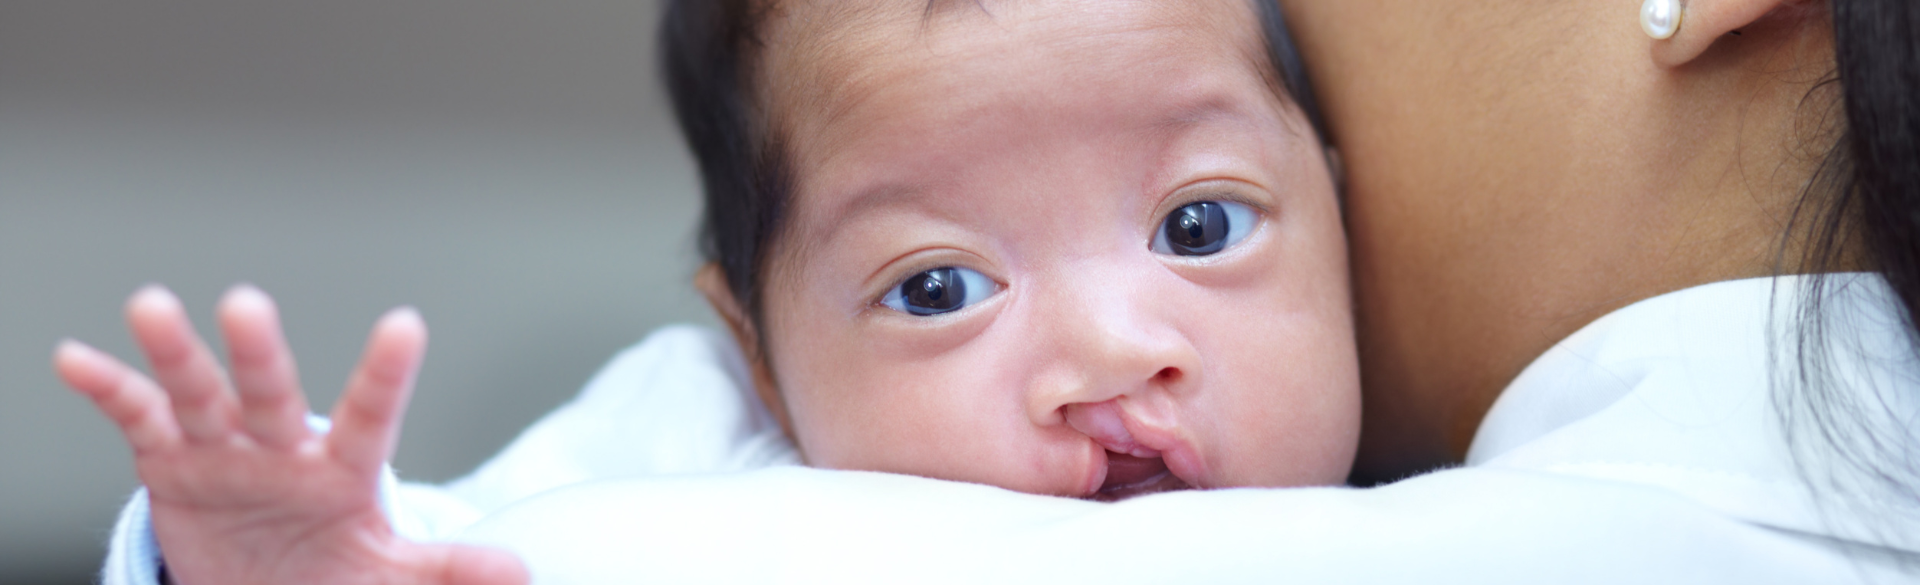 A grant from Align Technologies will support  Lowe in developing more efficient ways to treat infants with cleft lip and palate.